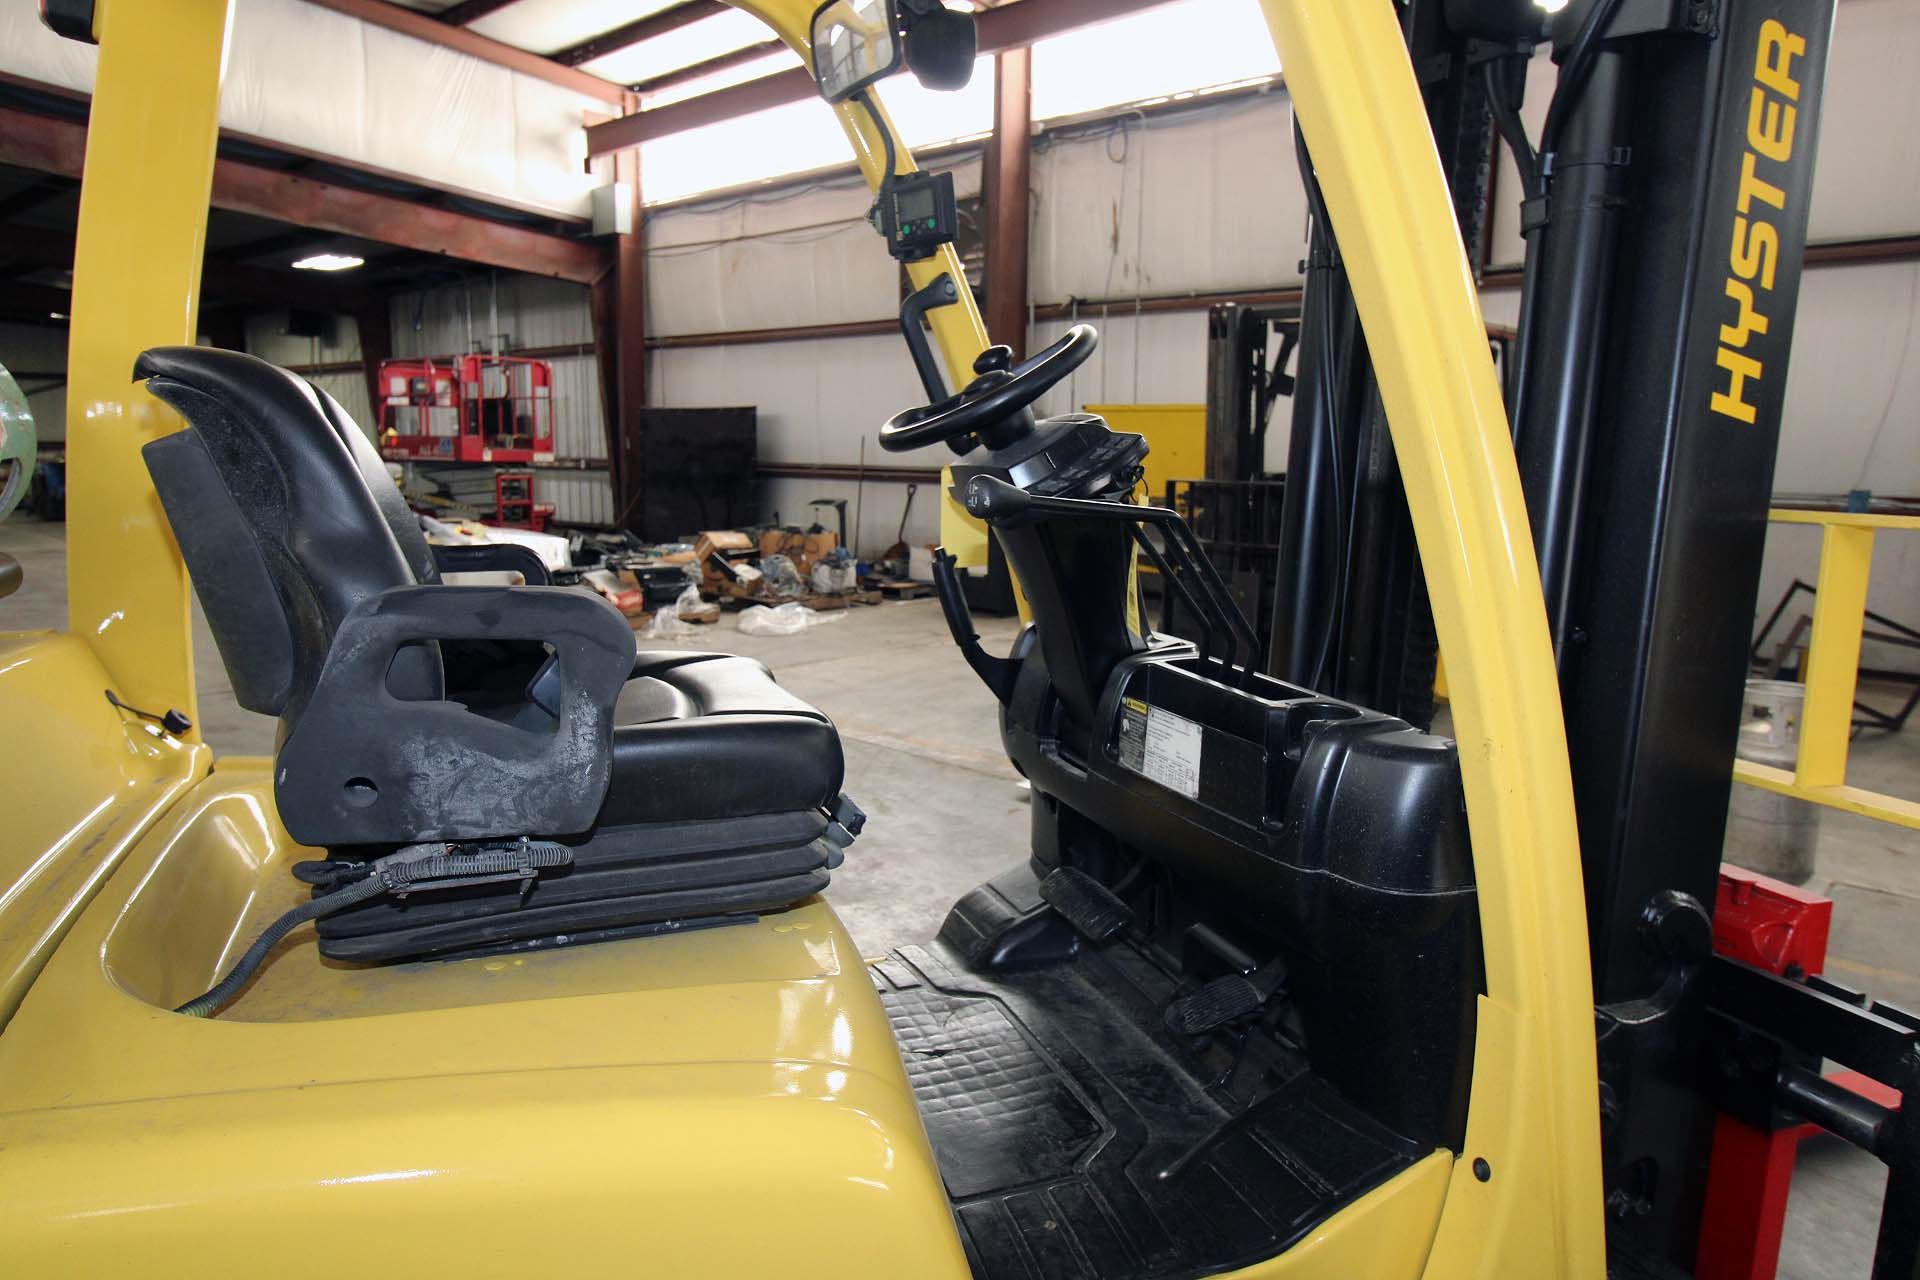 FORKLIFT, HYSTER 10,000 LB. BASE CAP. MDL. S100FT, new 2014, LPG, 88" 2-stage mast, 133" lift ht., - Image 6 of 7